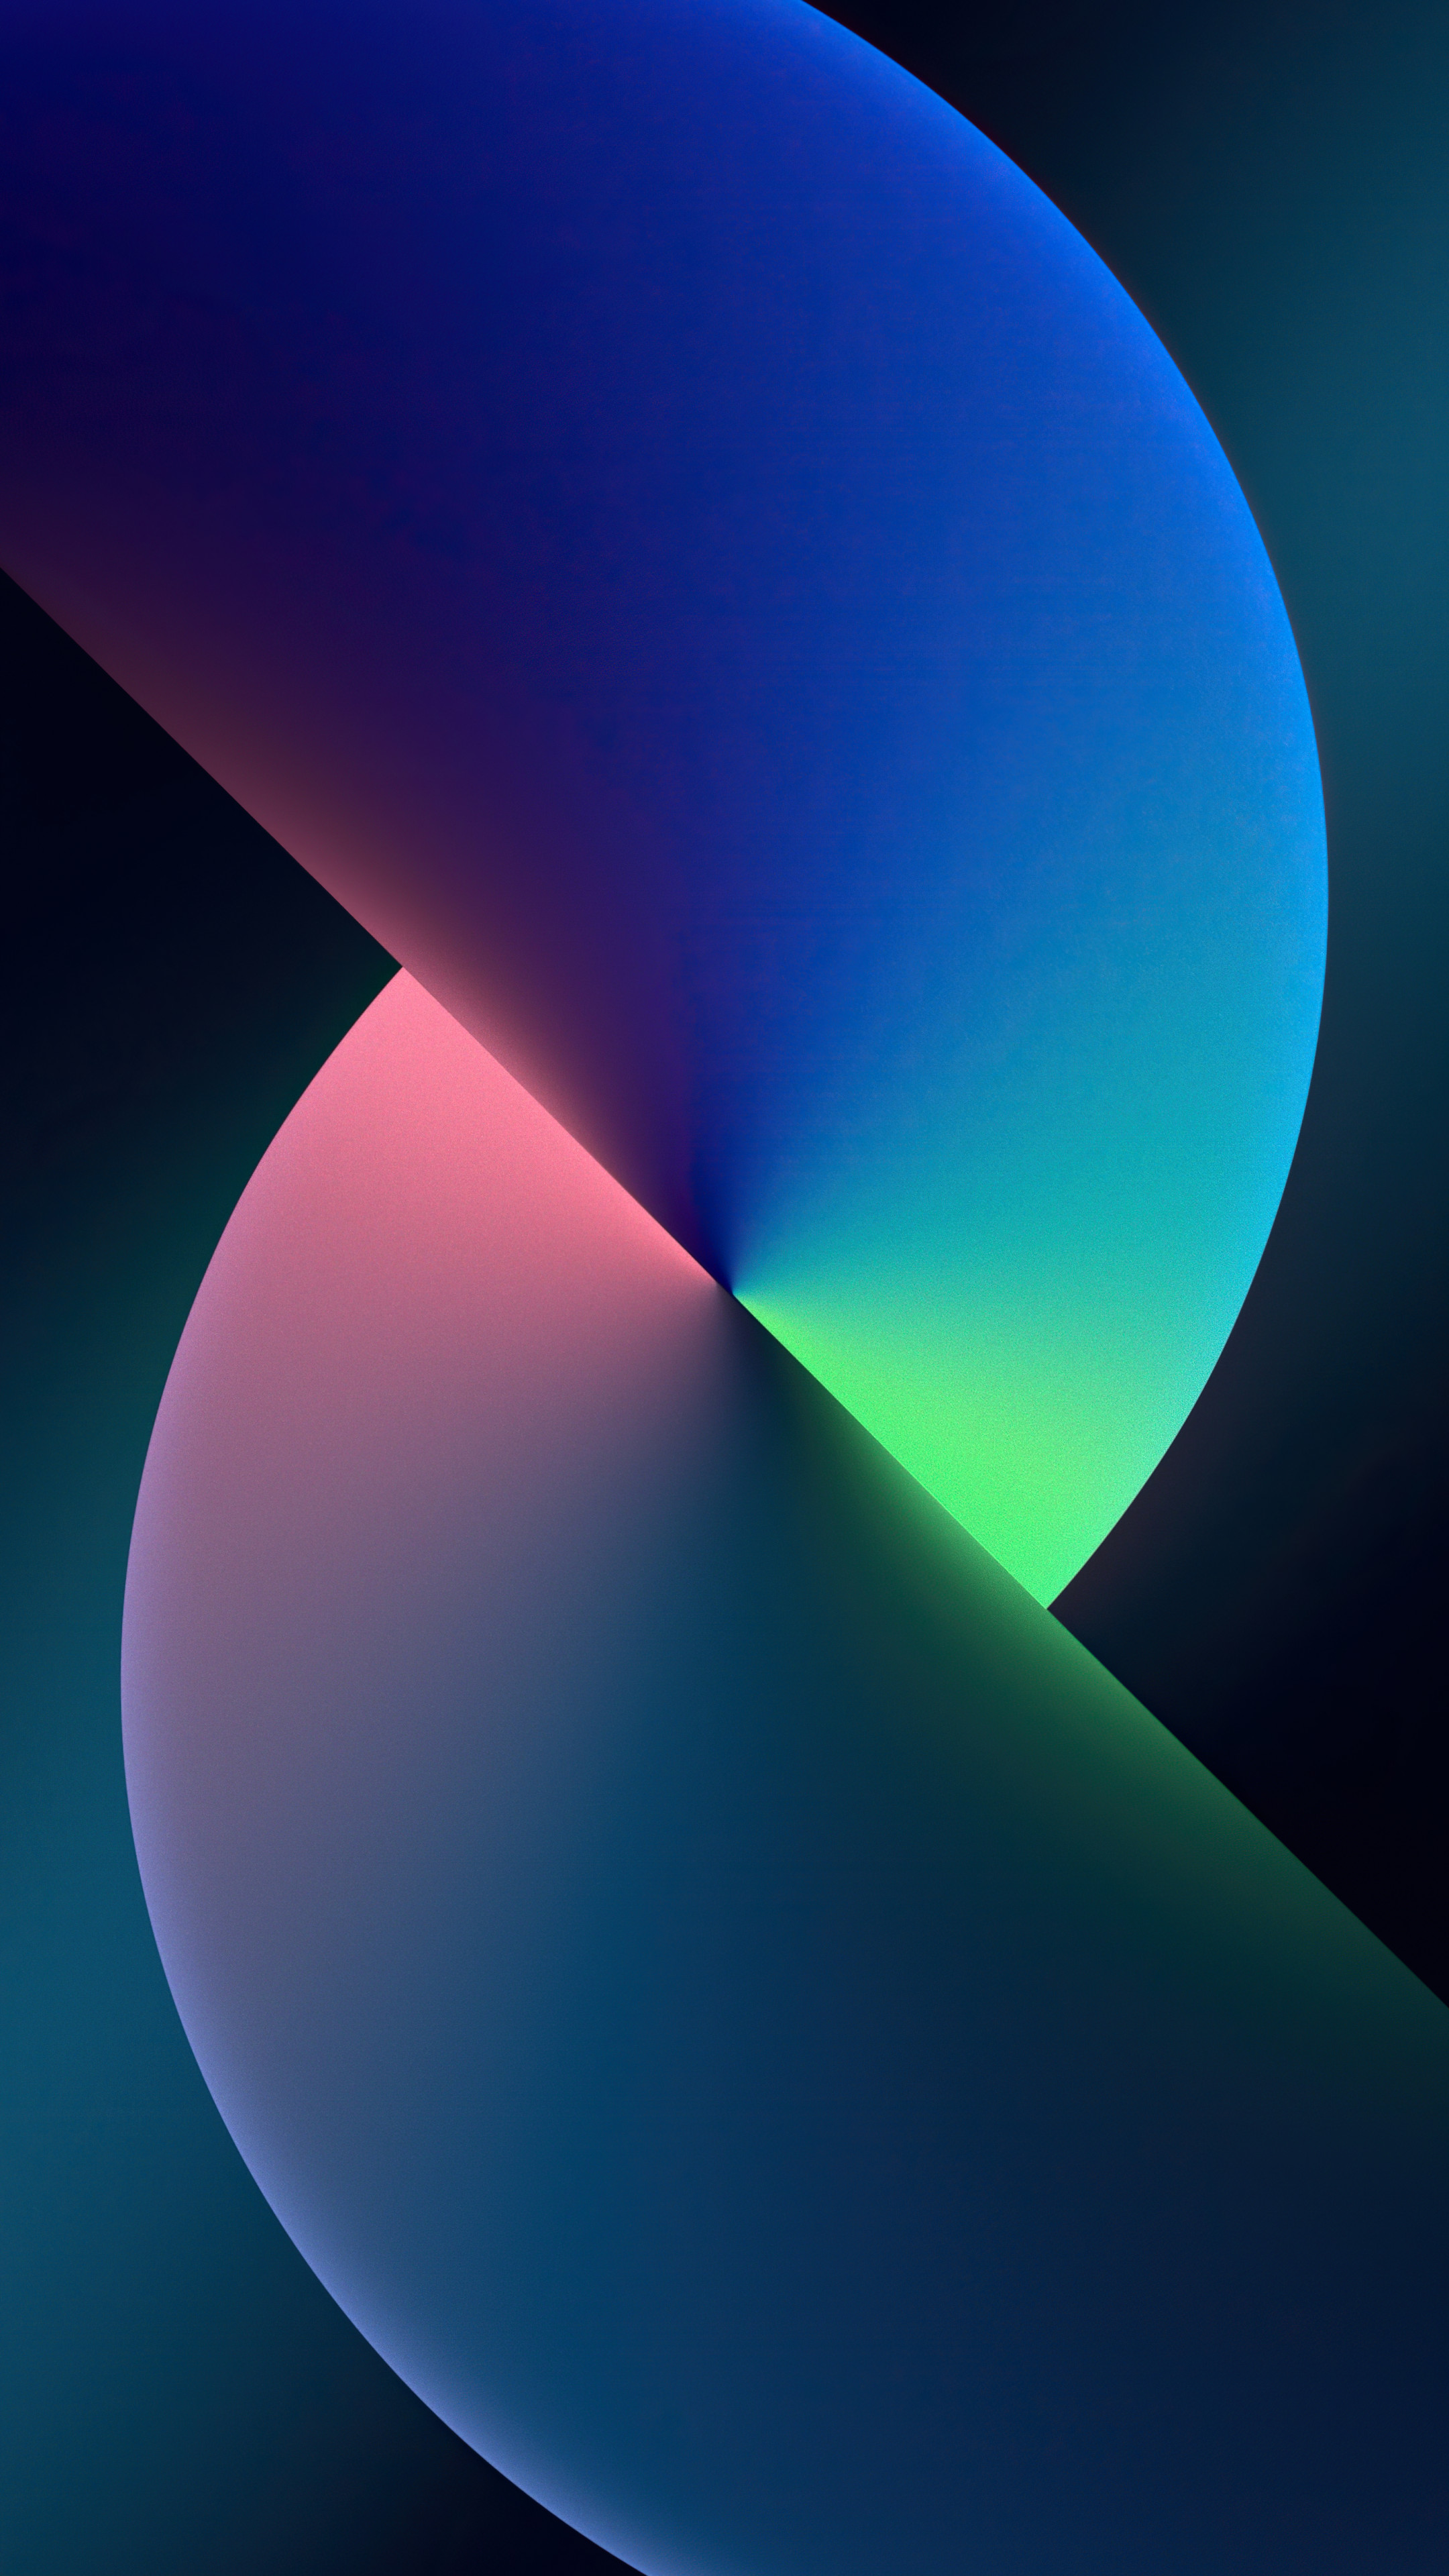 Wallpaper iPhone 13, twist, abstract, iOS 15, Apple September 2021 ...